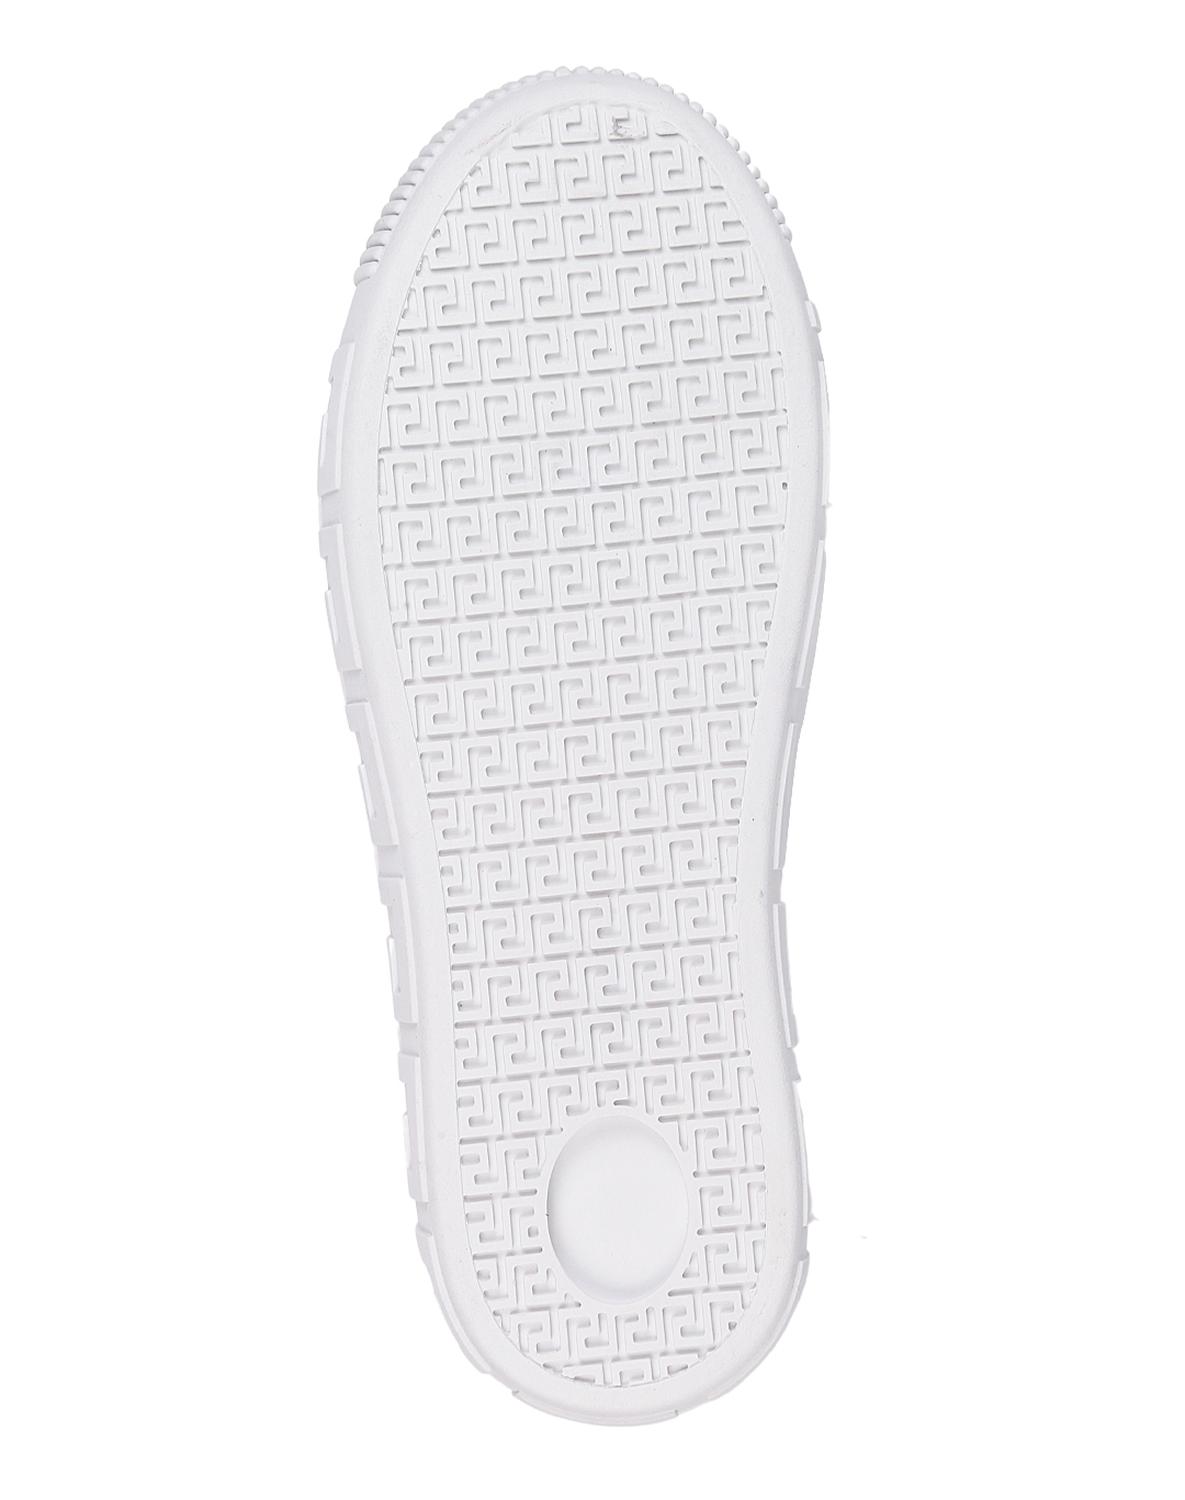 Tenis Casual Mujer Blanco Tacto Piel Been Class 12303909